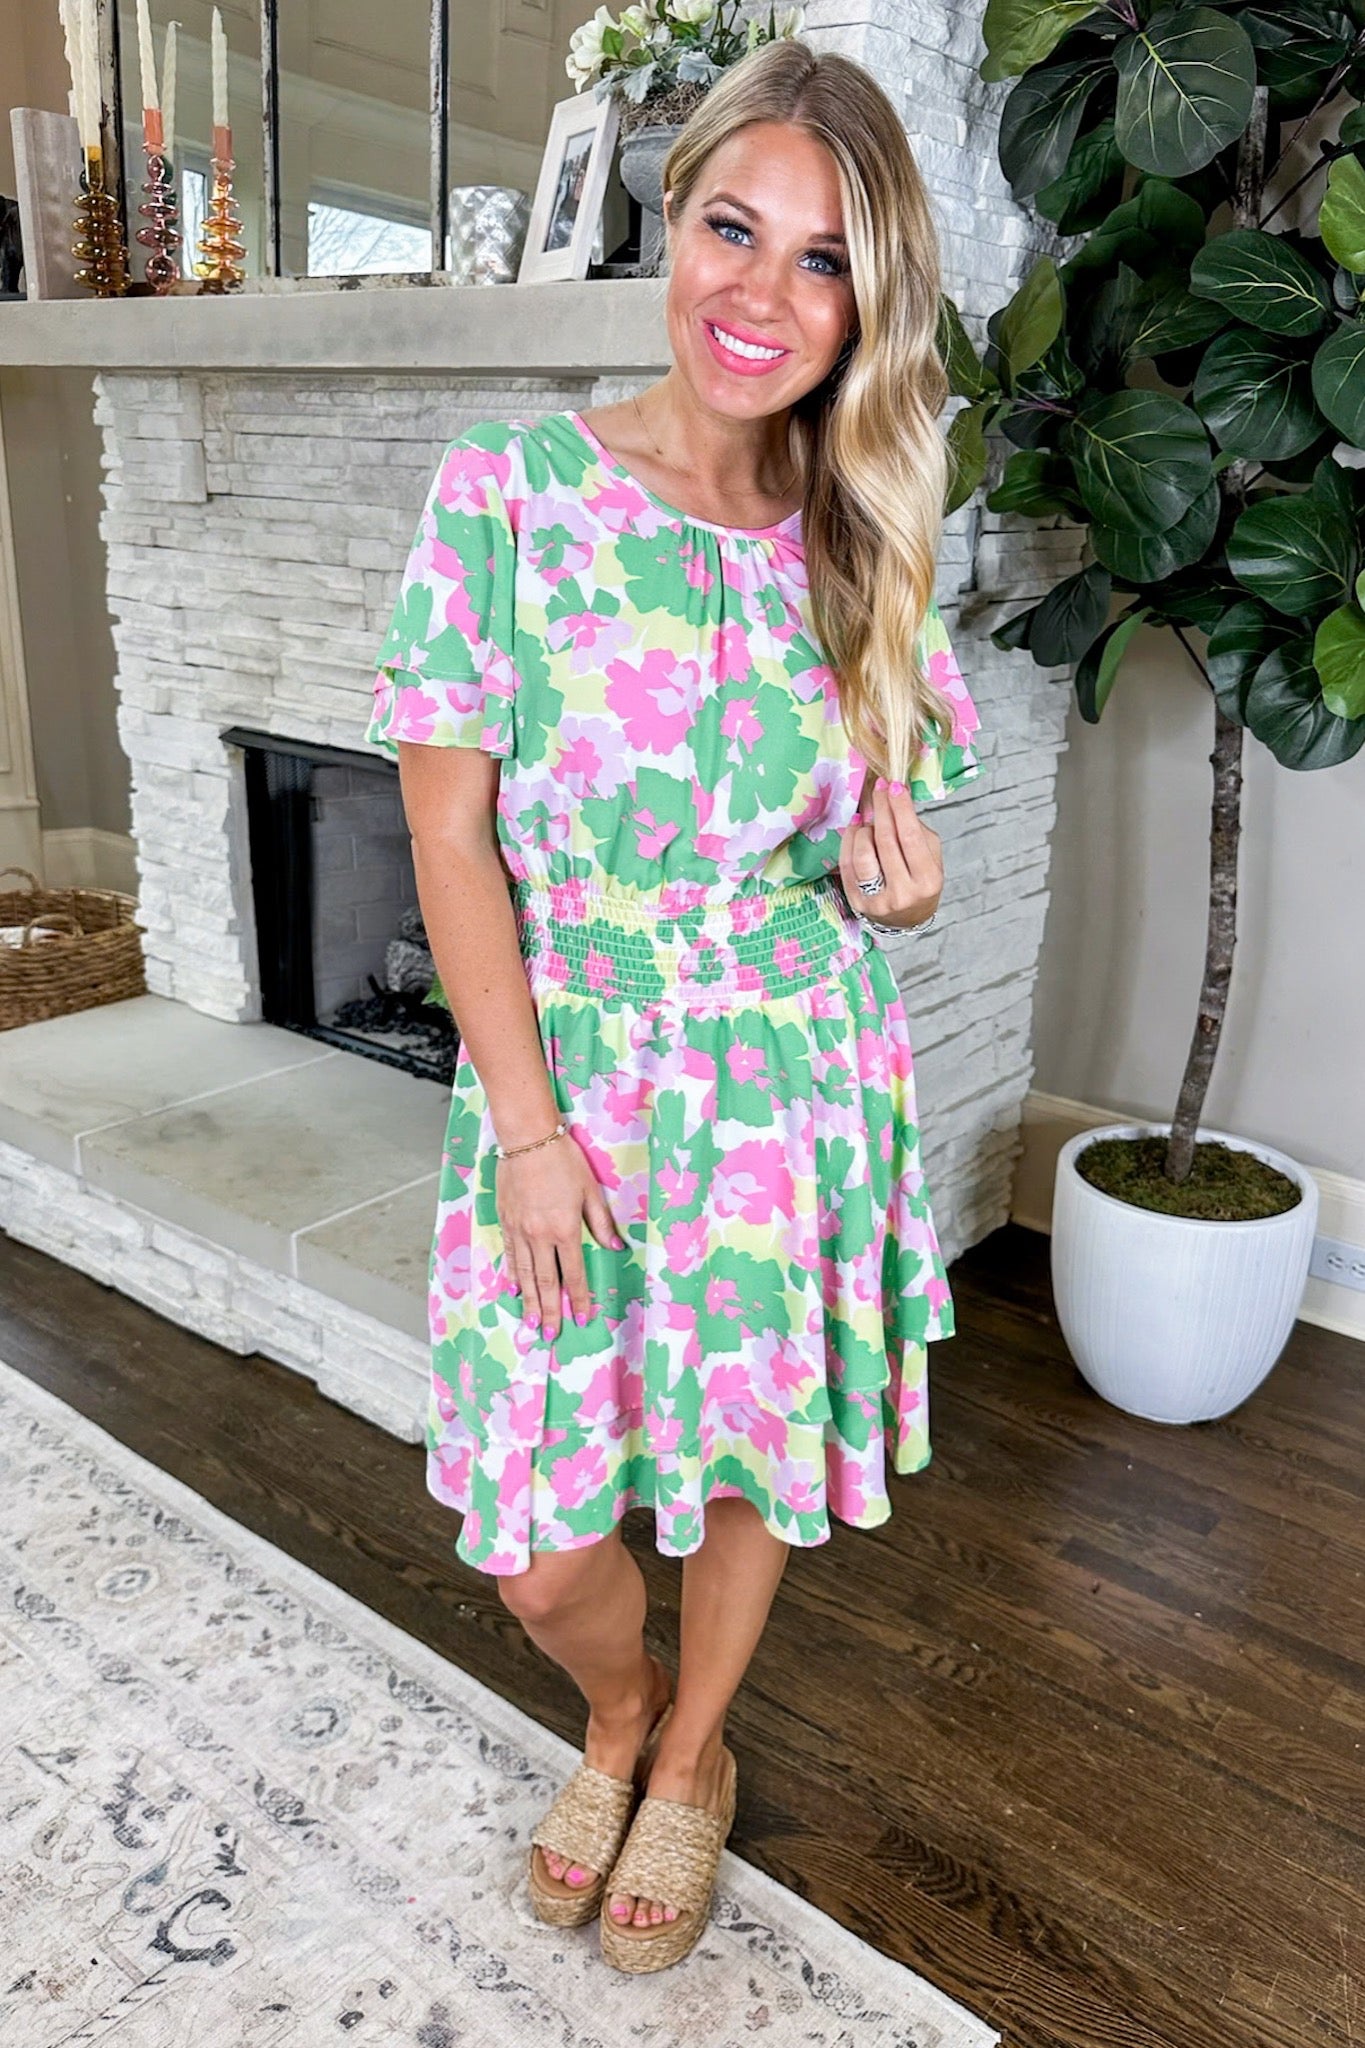 The Haven Primrose Melon Dress by Michelle McDowell